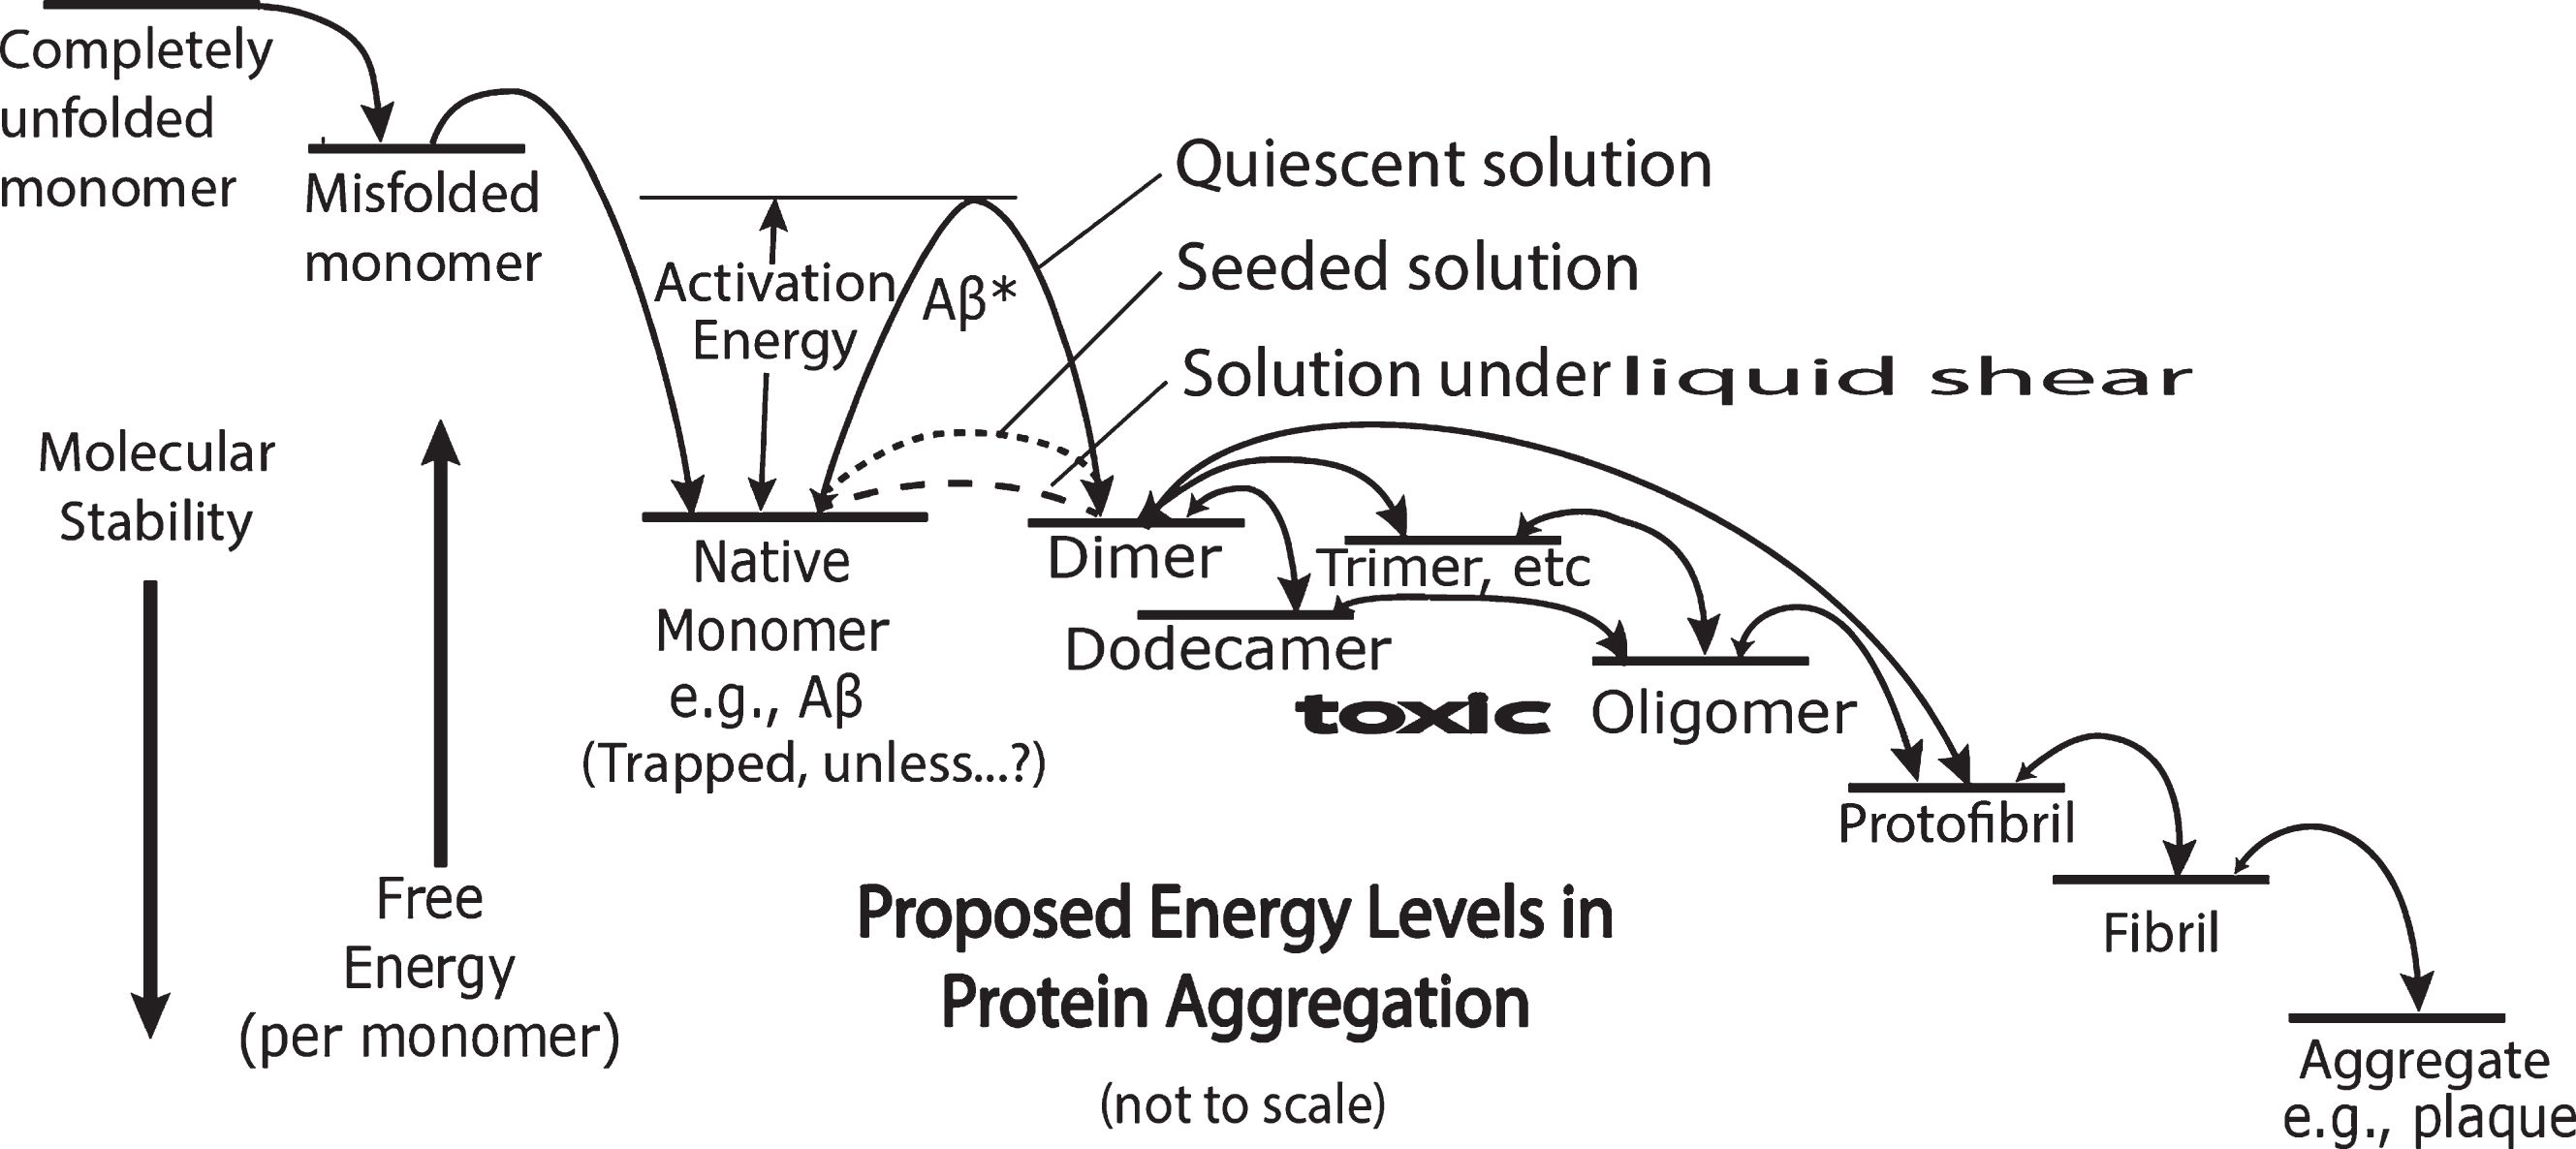 Energy diagram representing a highly simplified, symbolic overview of two processes, protein folding and amyloid cascade aggregation proceeding from native monomer through the formation of toxic oligomers, fibrils, to aggregates. The free energy level scale is arbitrary and not to scale. The free energy and molecular stability arrows are arbitrary in size but not direction. As indicated with the vertical arrows on the left, the stability of the monomer increases with decreasing free energy. The heights of curved arrows above straight line energy levels represent speculative comparative activation energies. The relative sizes of the arrow heads in the double headed arrows indicate speculative relative rates in the equilibrium between each of the two chemical species. The dashed line between monomer and dimer represents the free energy of the monomer as it is transformed in a non-equilibrium shear energy process probably from a predominantly alpha to a predominantly cross beta conformation. The dotted line represents the lowered activation energy when exogenous oligomers are added to monomer solutions and catalyze further aggregation. The single line energy labels “Dimer”, “Trimer, etc.” do not reveal the complexity of different possible energy levels and conformations of in-register and out-of-register conformations. The “(Trapped. Unless…)” label under the “Native Monomer” energy level implies there are means (e.g., shearing and seeding) by which the very high activation energy barrier can be circumvented and aggregation commences.